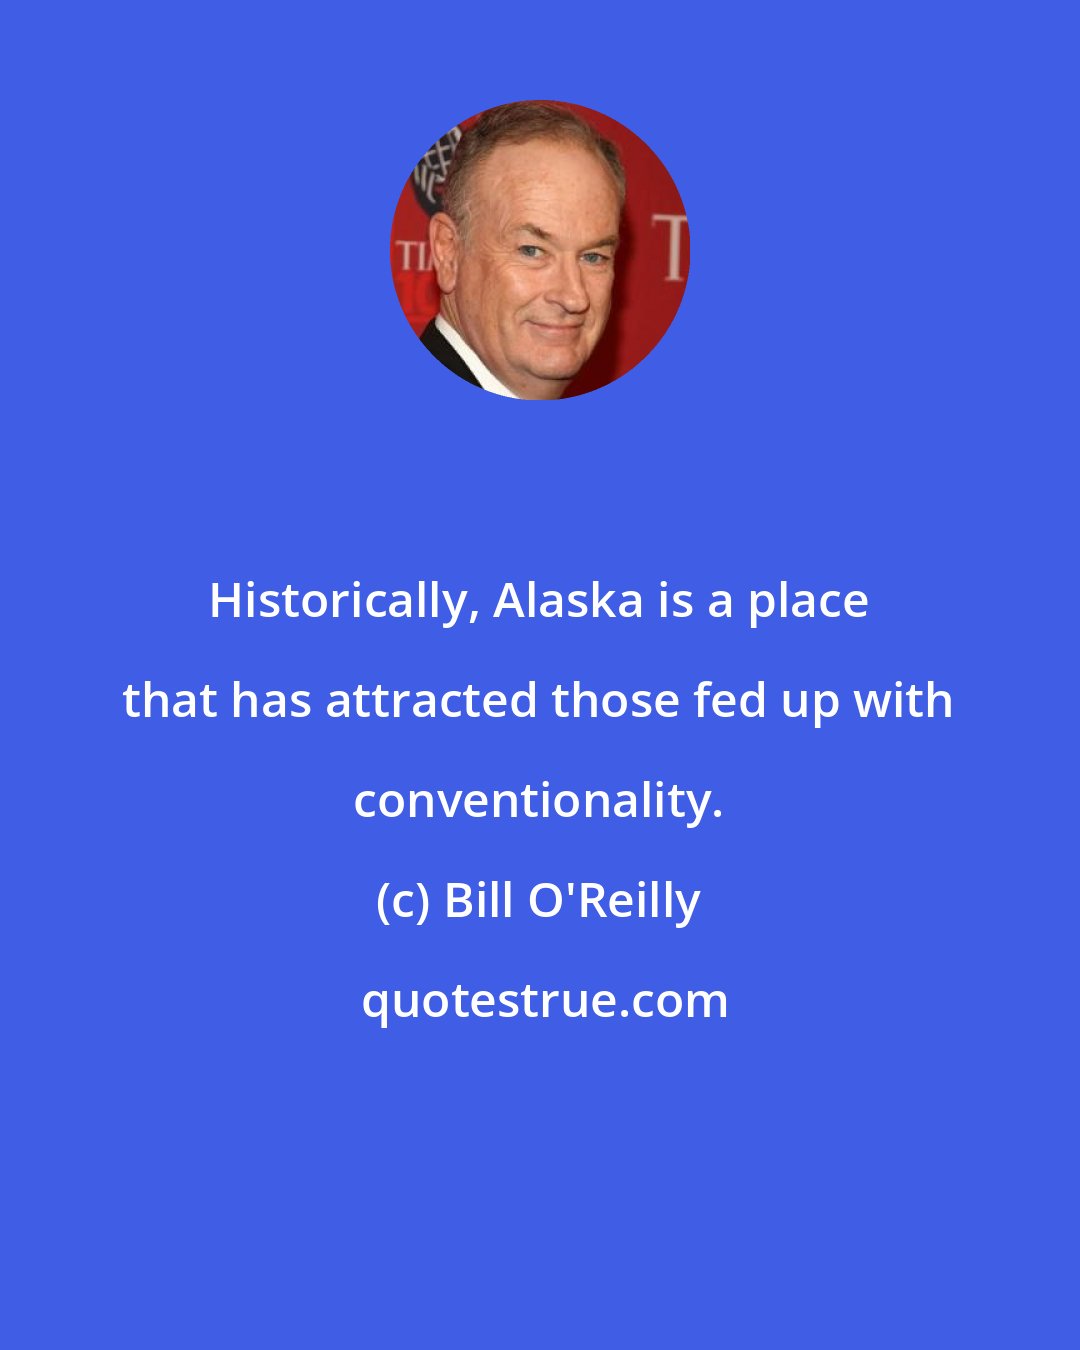 Bill O'Reilly: Historically, Alaska is a place that has attracted those fed up with conventionality.